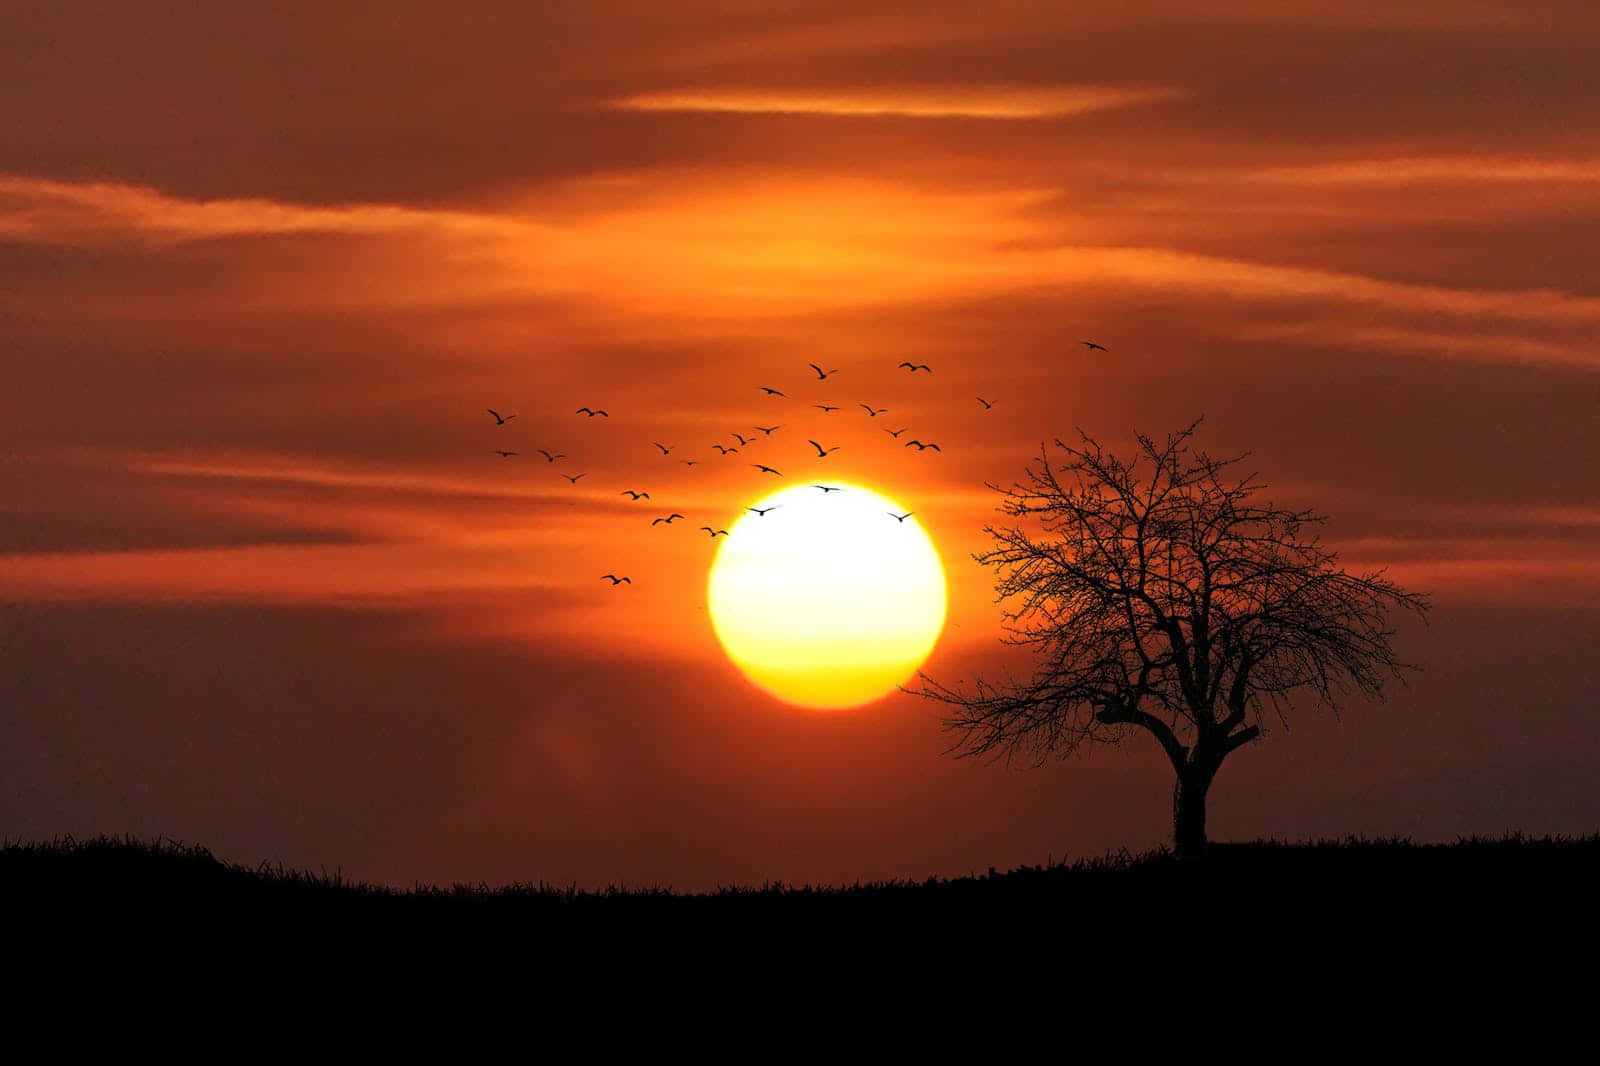 Cute Flock Of Birds And A Tree At Sunset Wallpaper